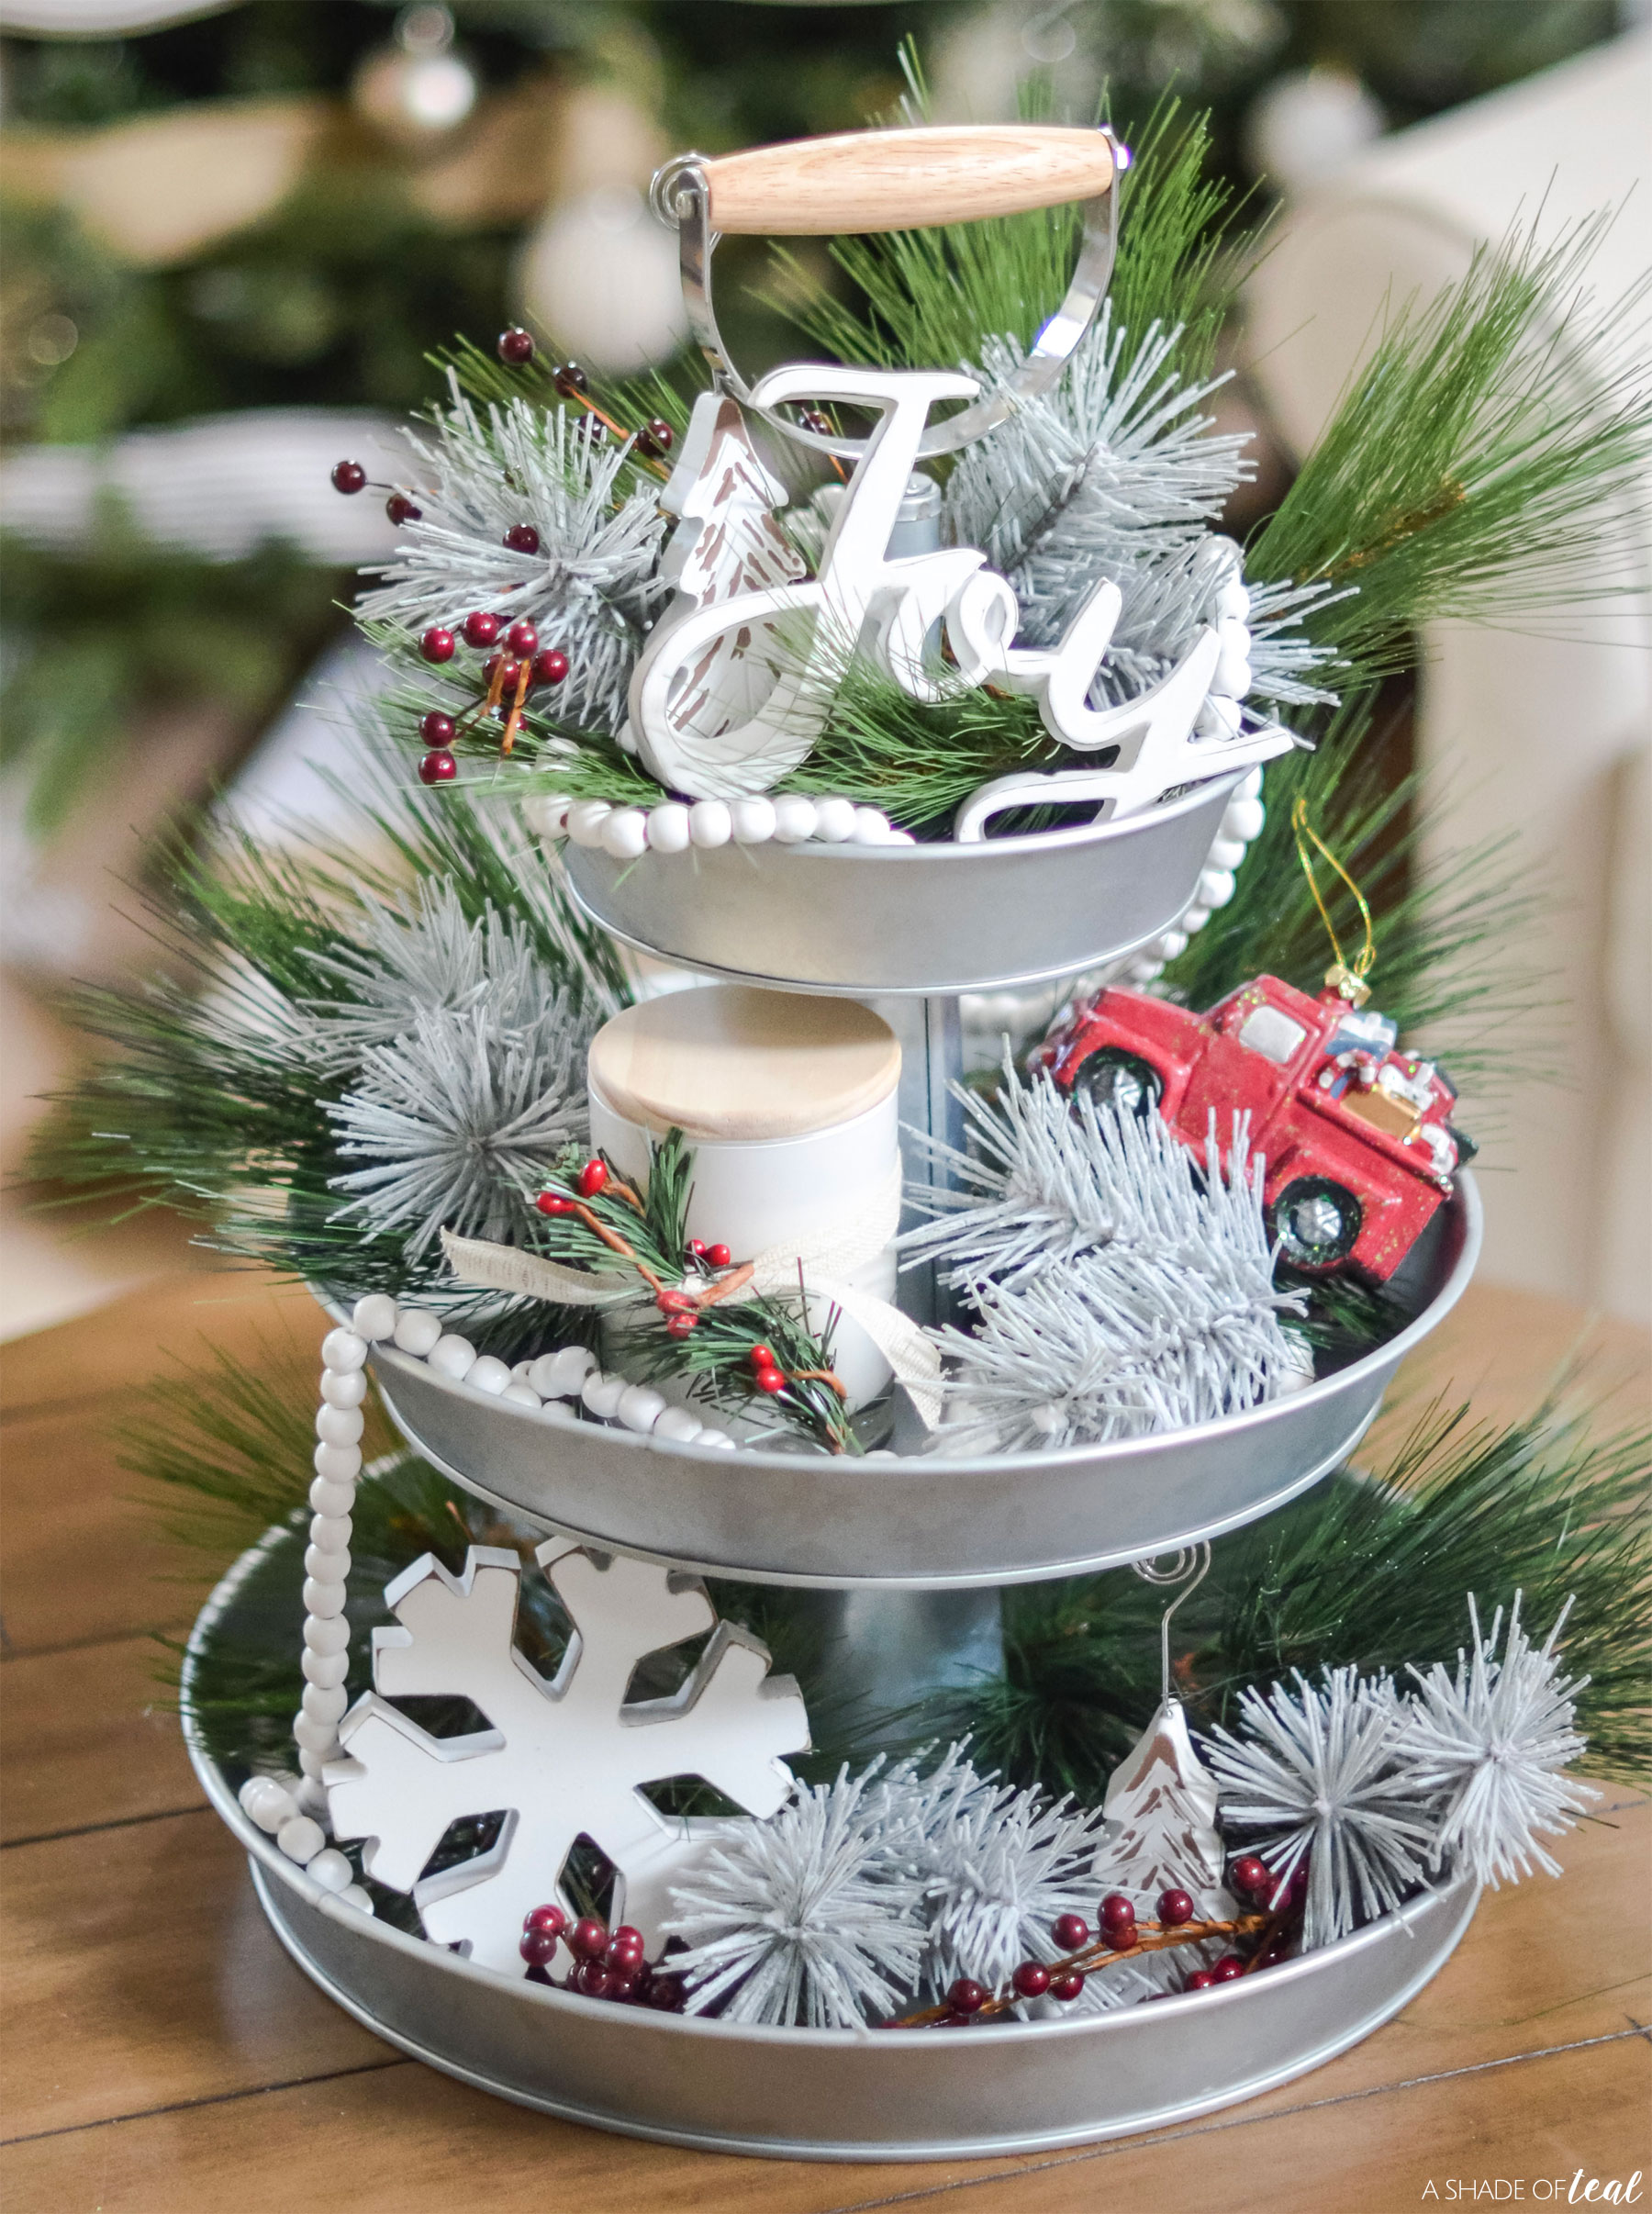 New Pinterest Christmas Decorations for Large Space